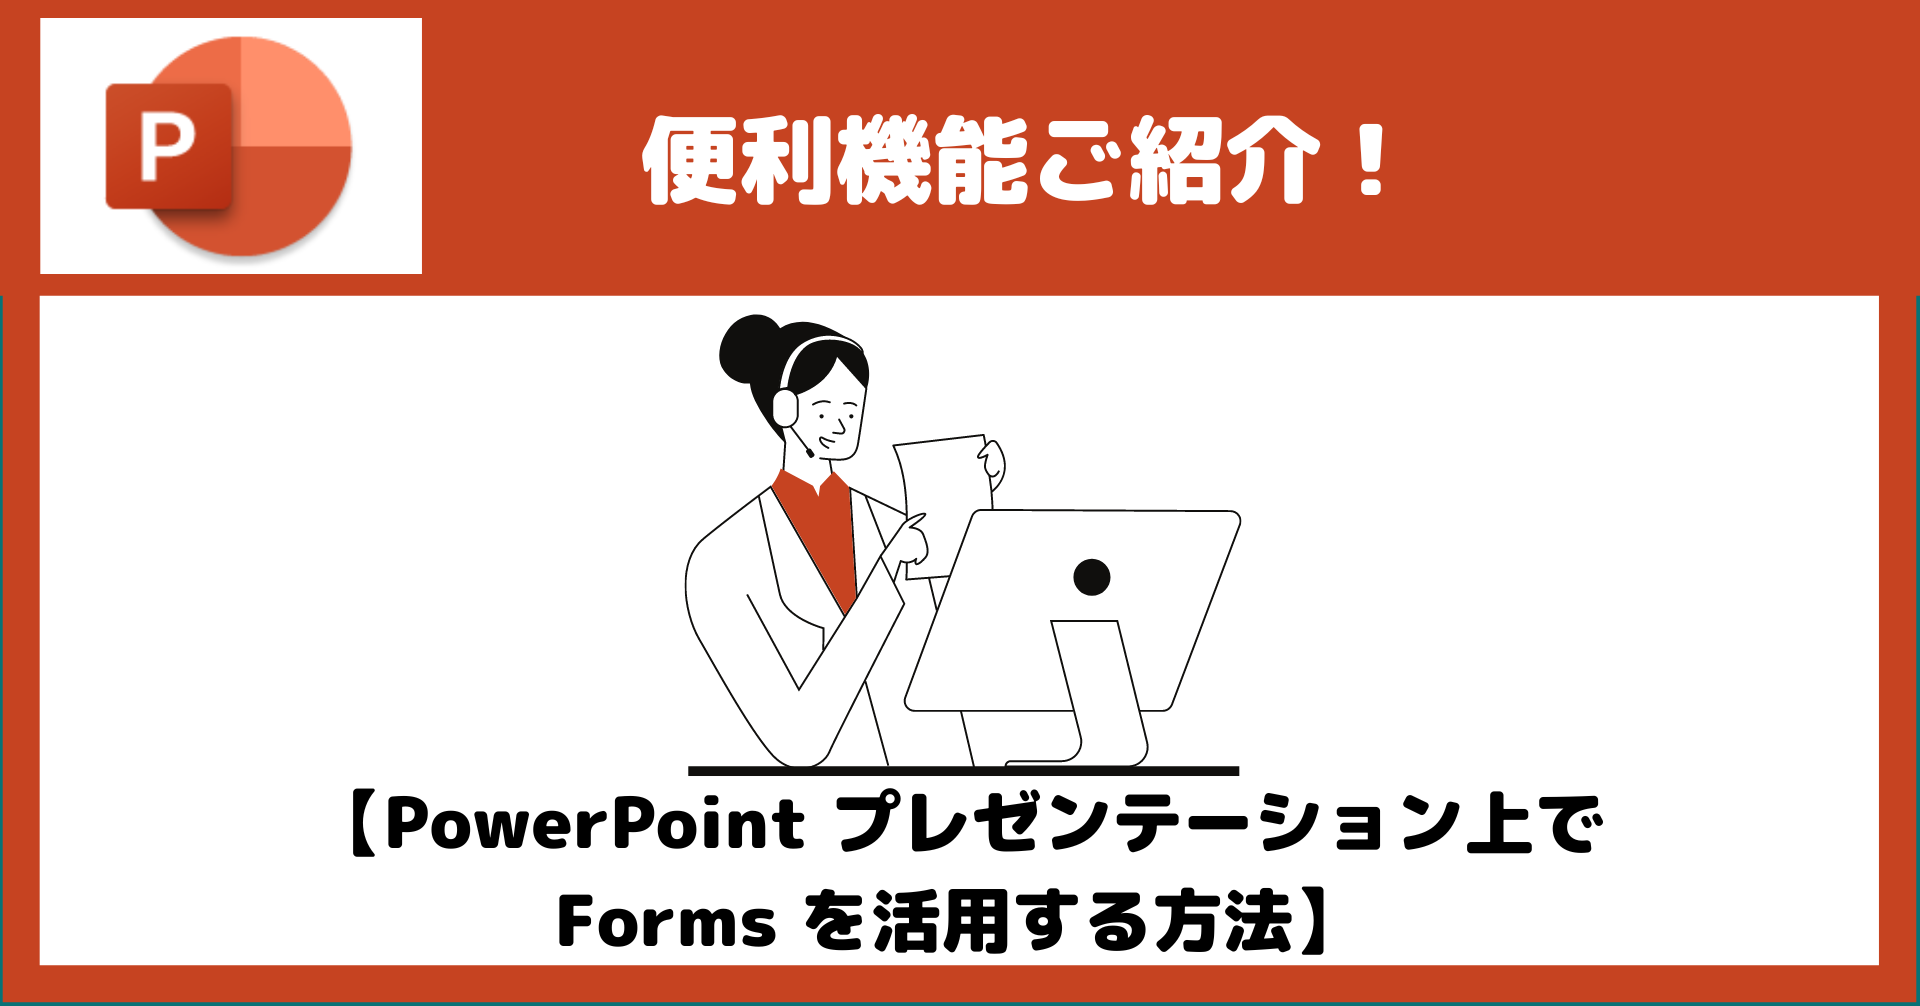 PowerPoint プレゼンテーション上でForms を活用する方法